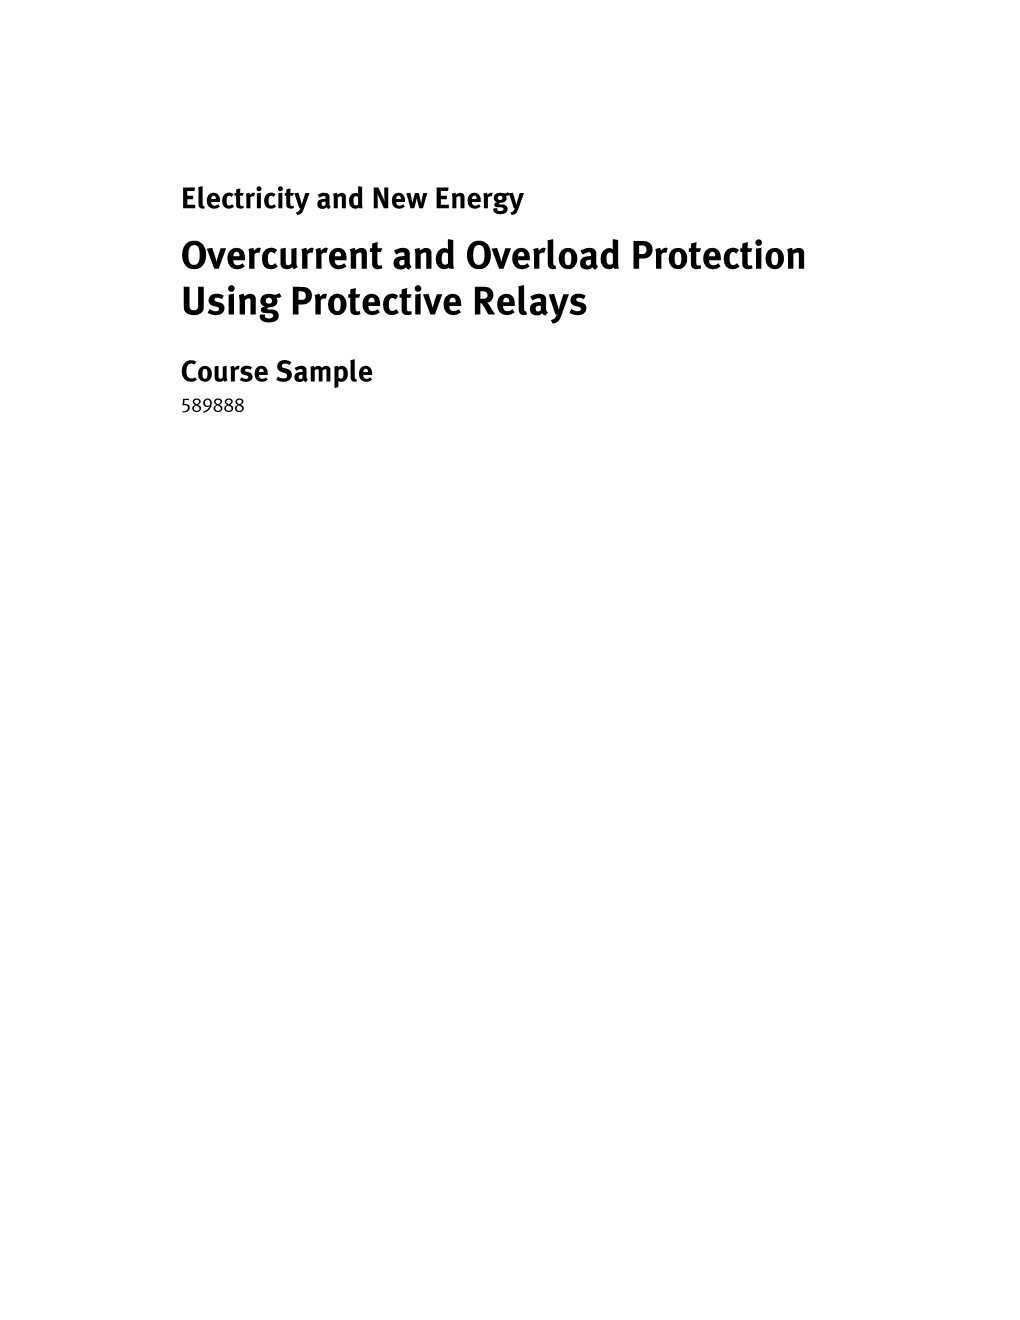 Overcurrent and Overload Protection Using Protective Relays